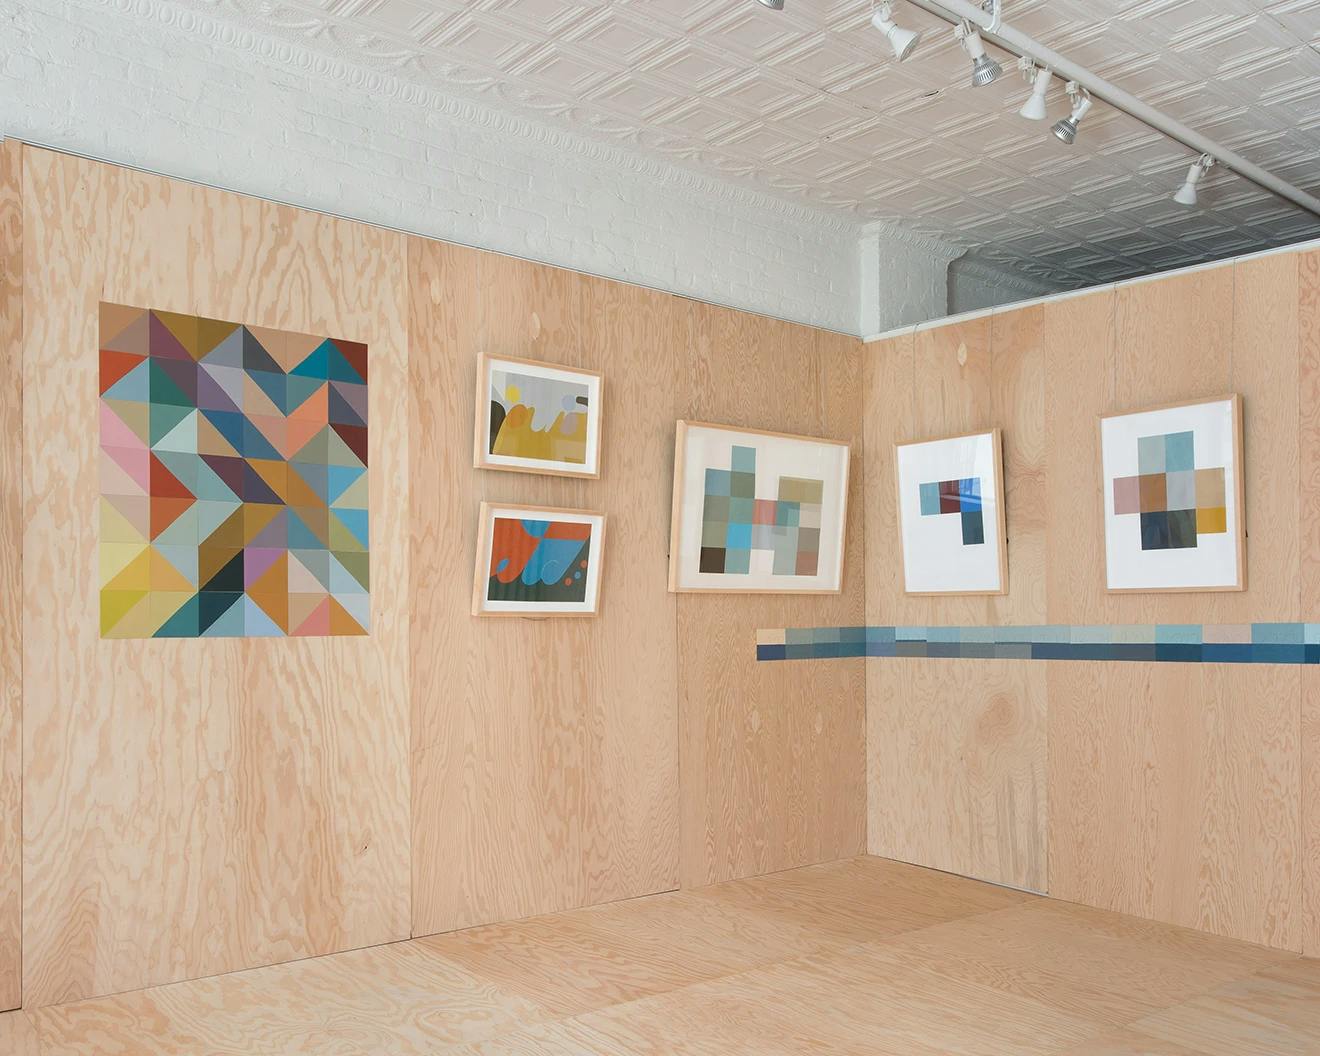 Artwork installed as part of The Trace of the Sun, one of Uprise Art's Exhibitions in New York, NY.